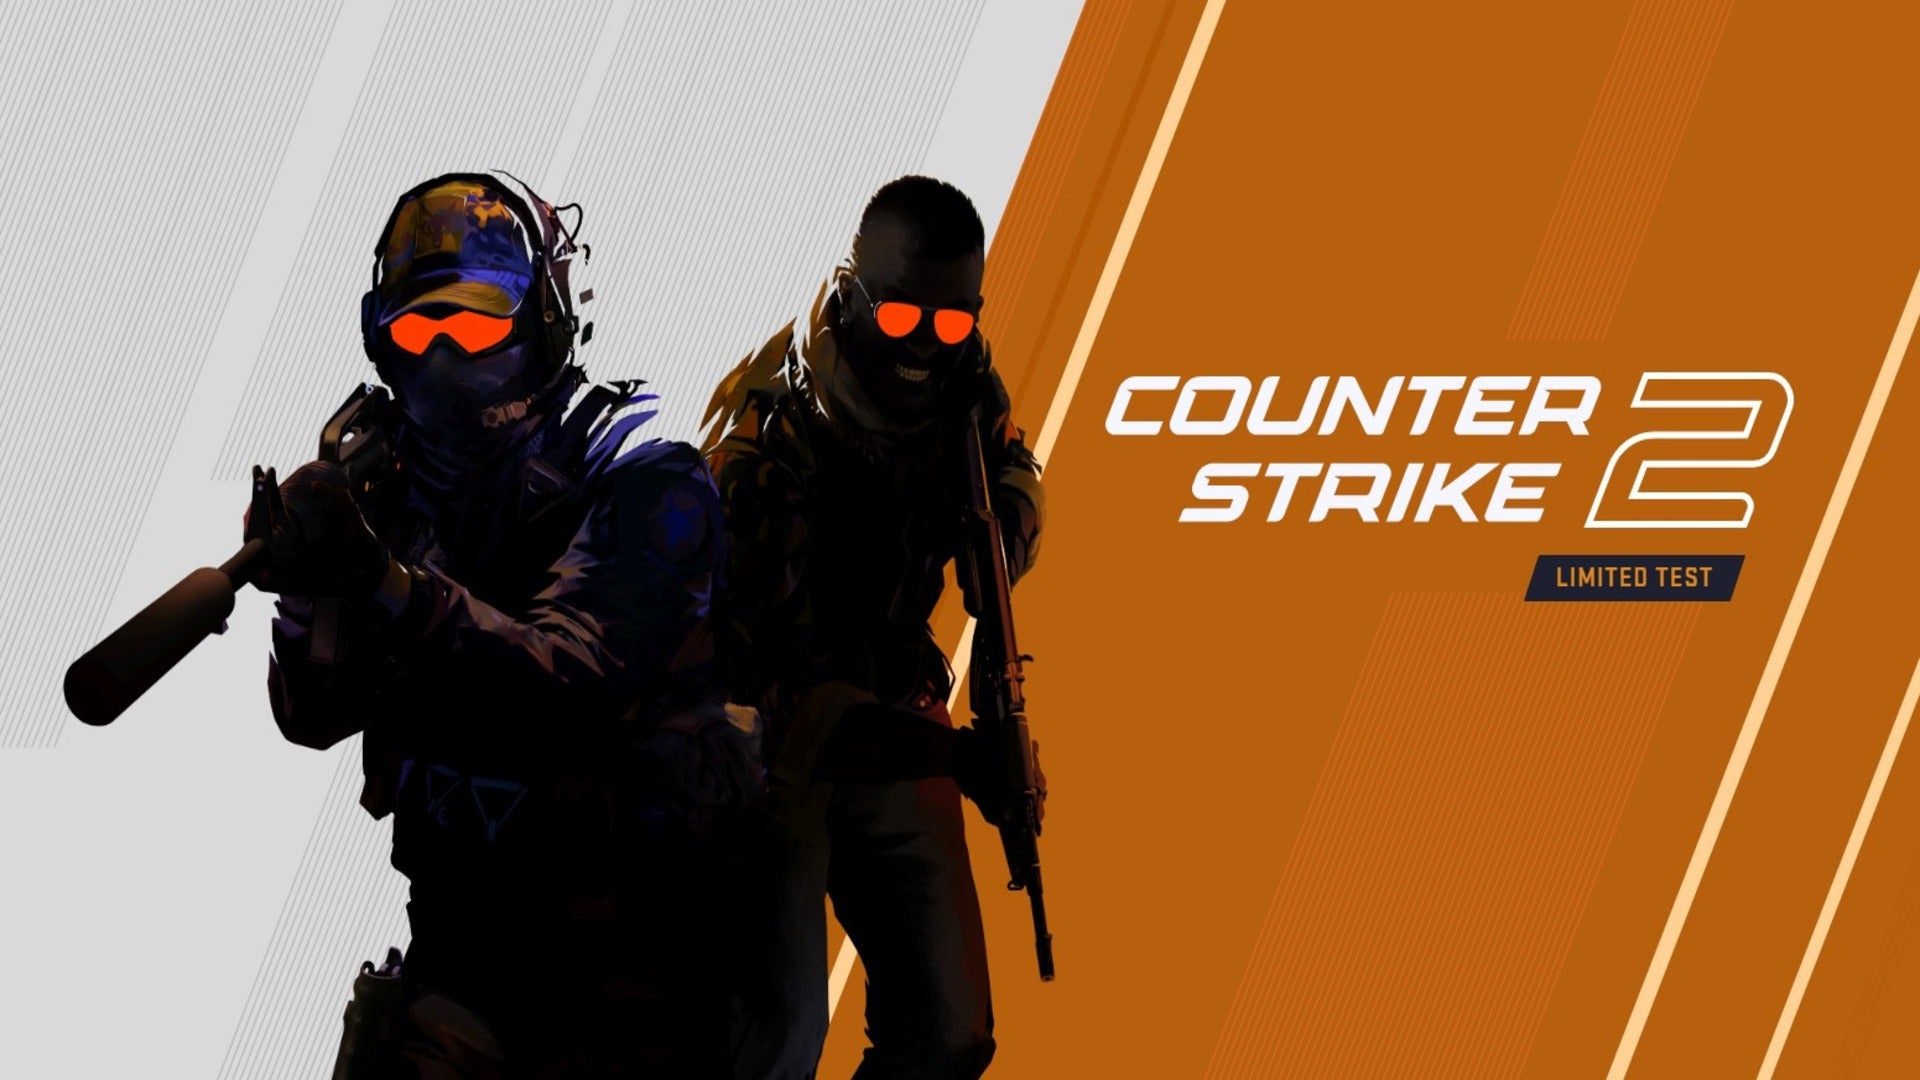 Image for Counter-Strike 2 has finally been revealed, with a limited test available today